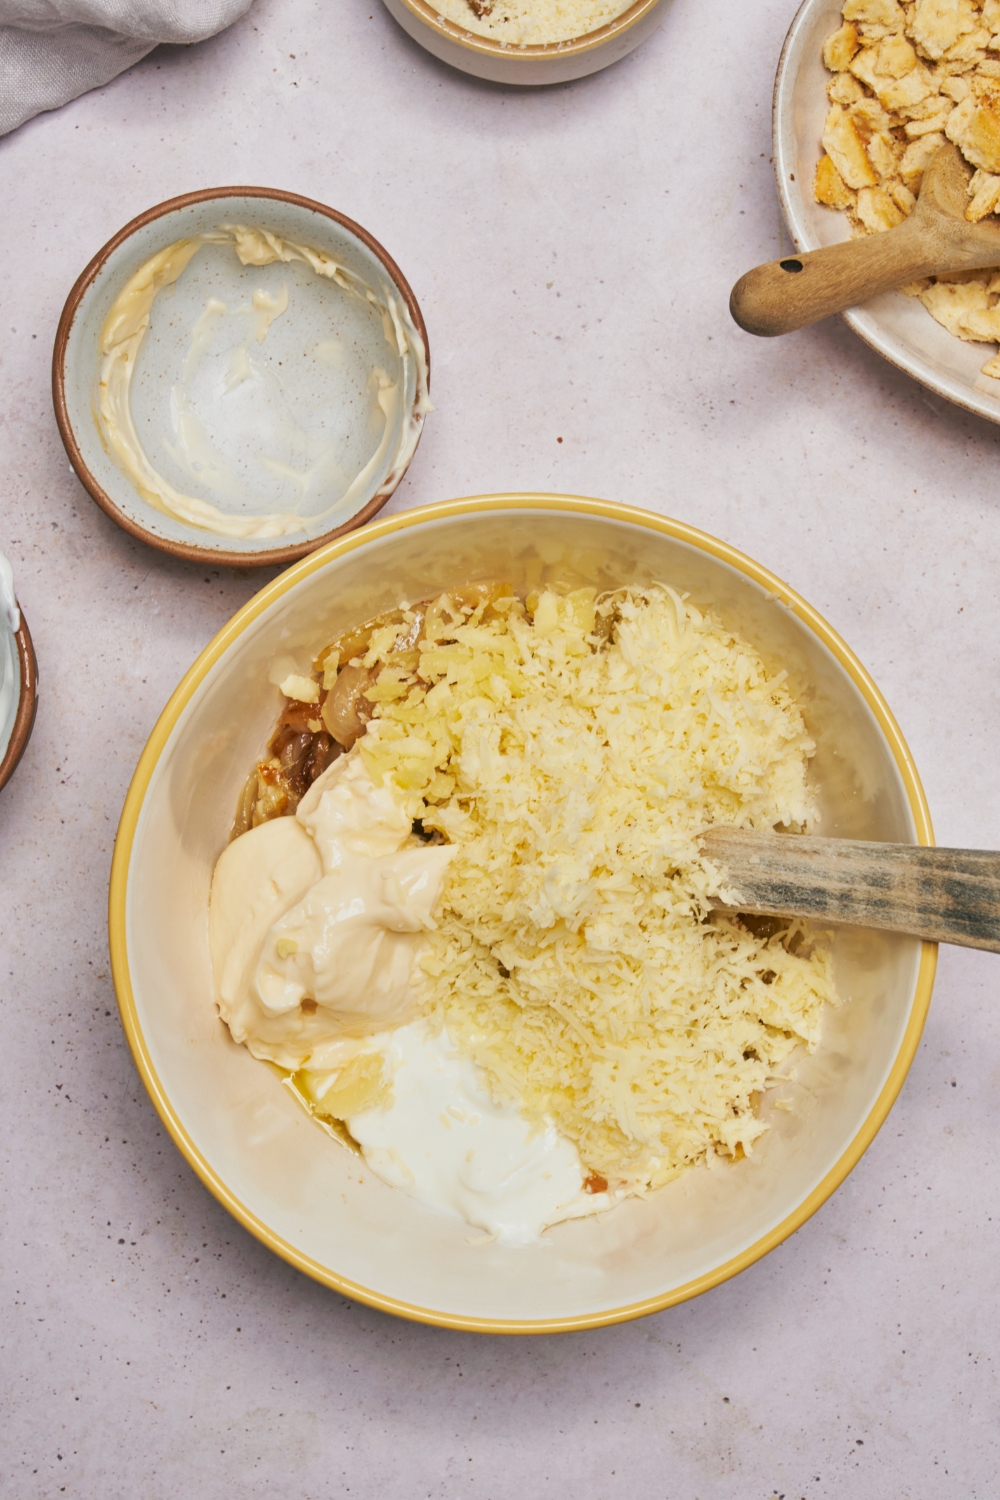 A mixing bowl filled with shredded cheese, mayonnaise, sour cream, and caramelized onion. The ingredients have not yet been mixed together.